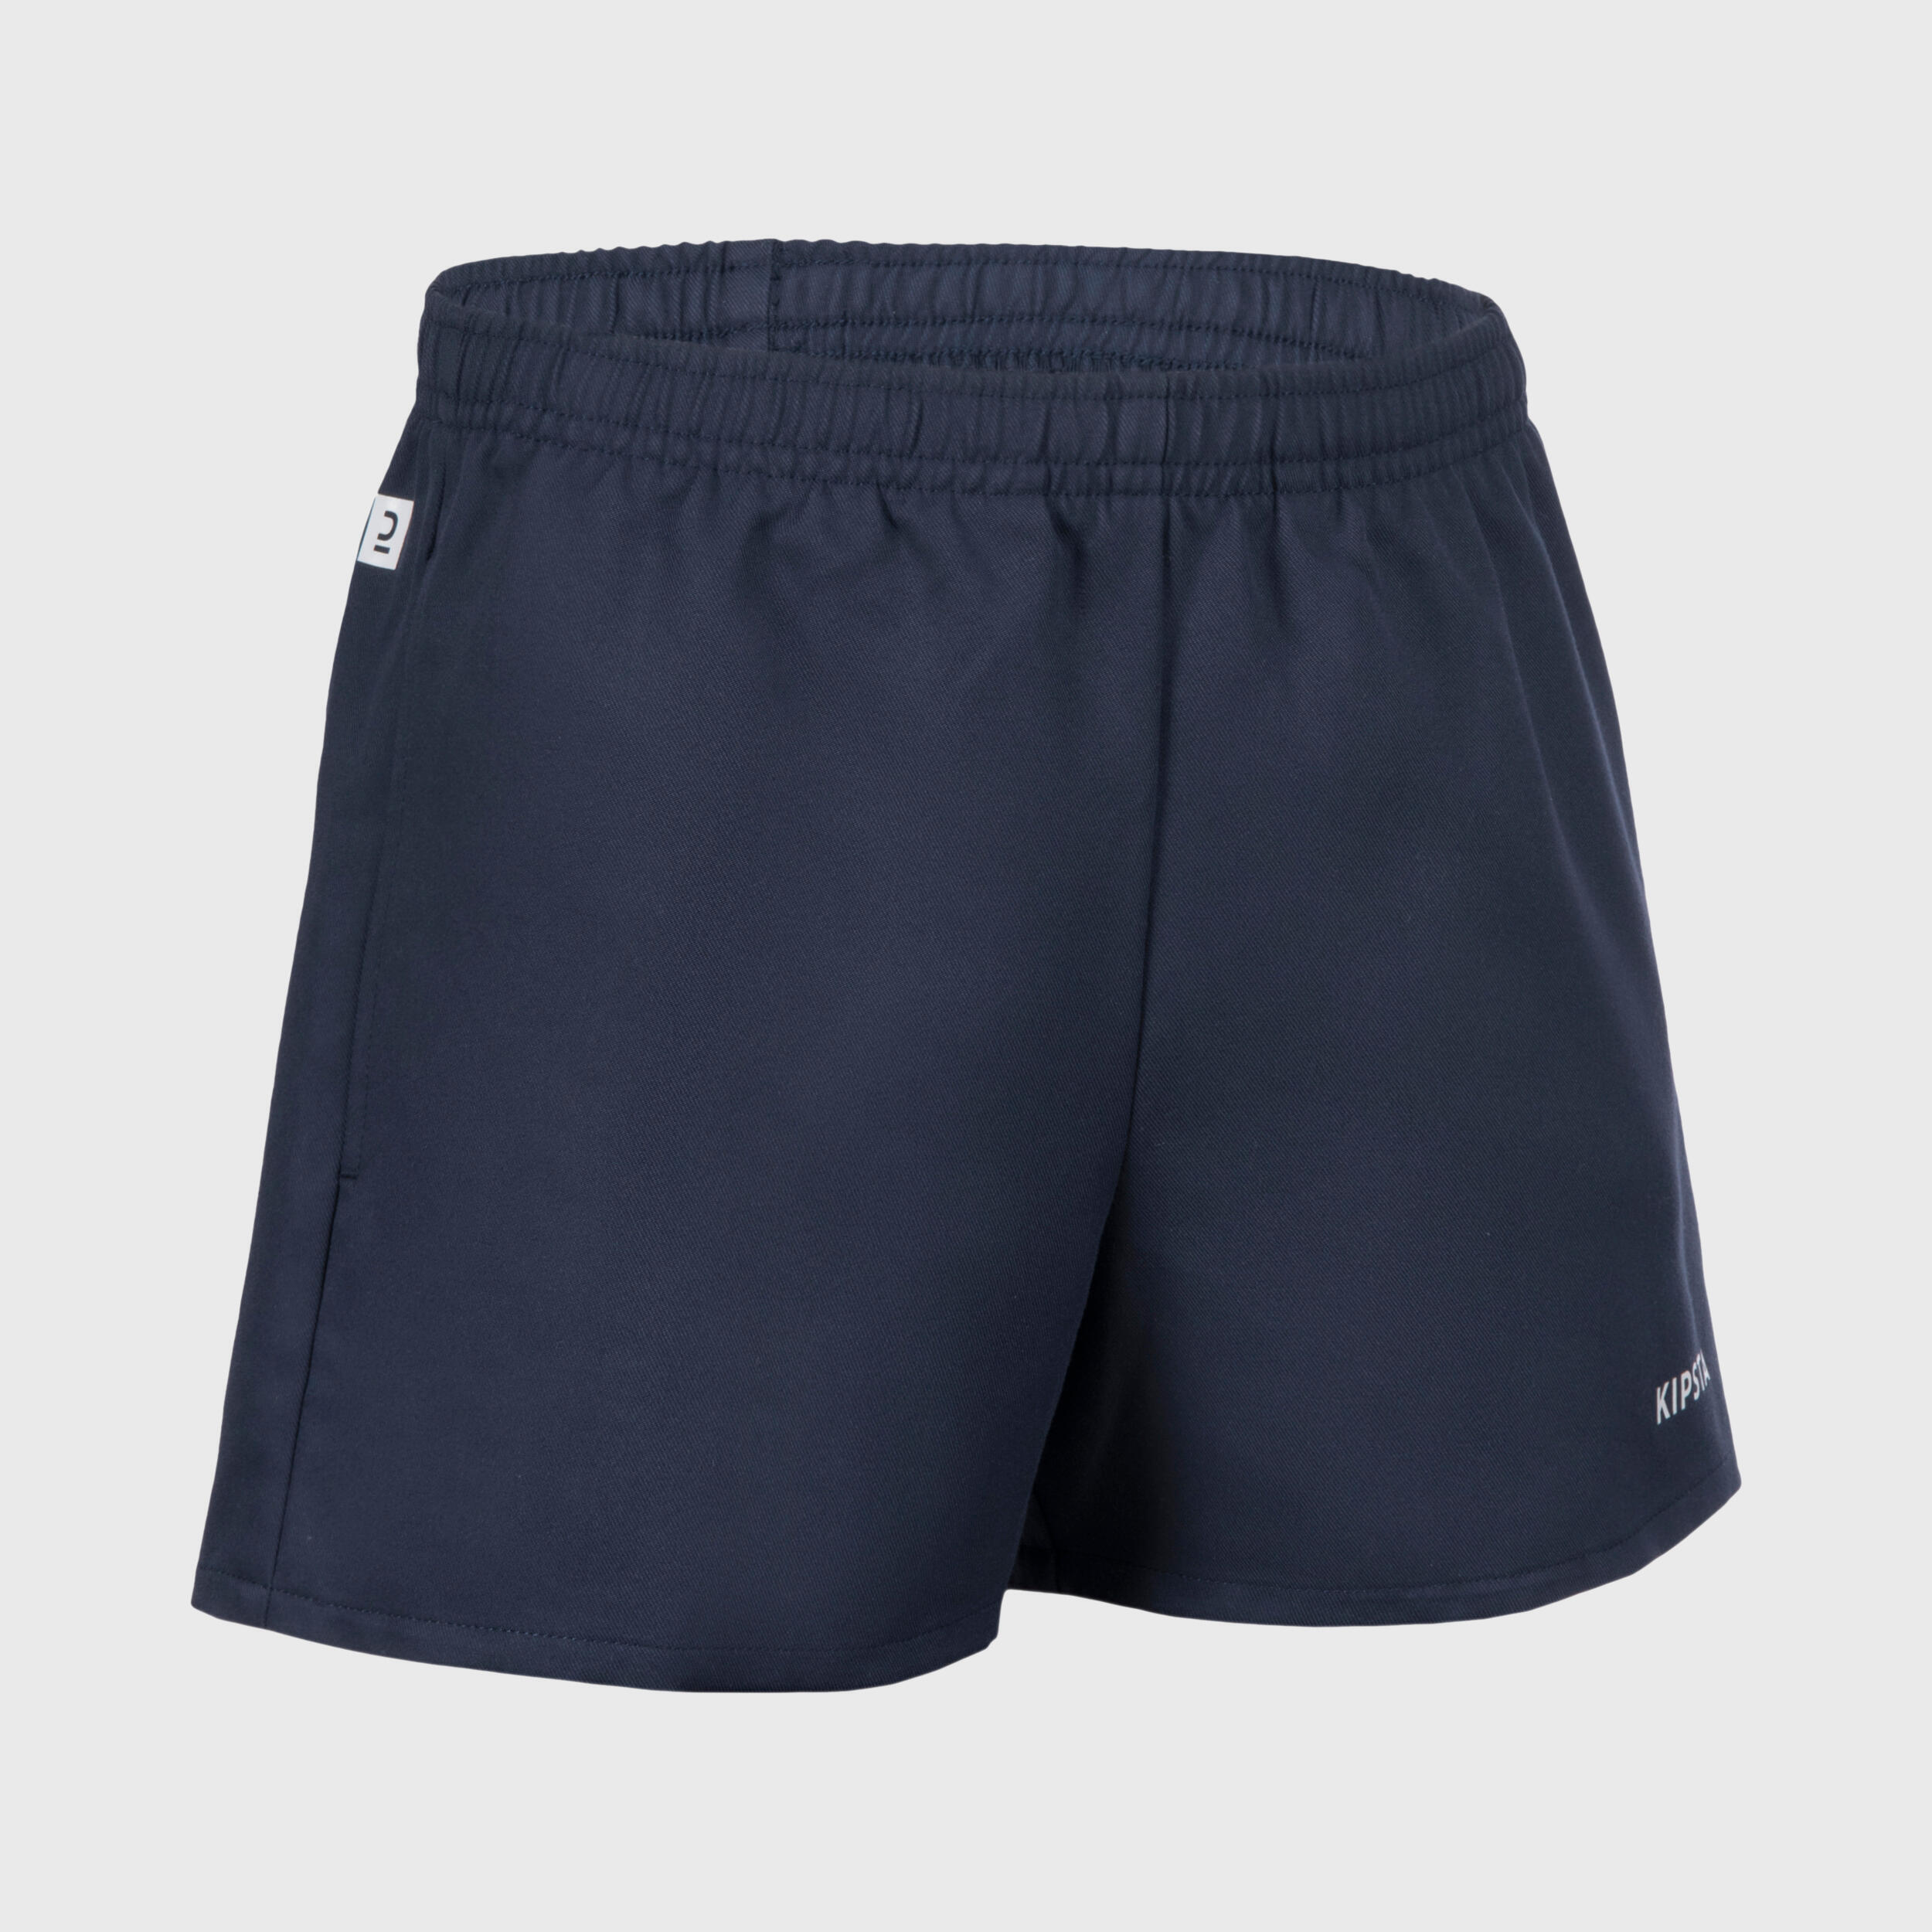 Adult Rugby Shorts with Pockets R100 - Blue 1/6